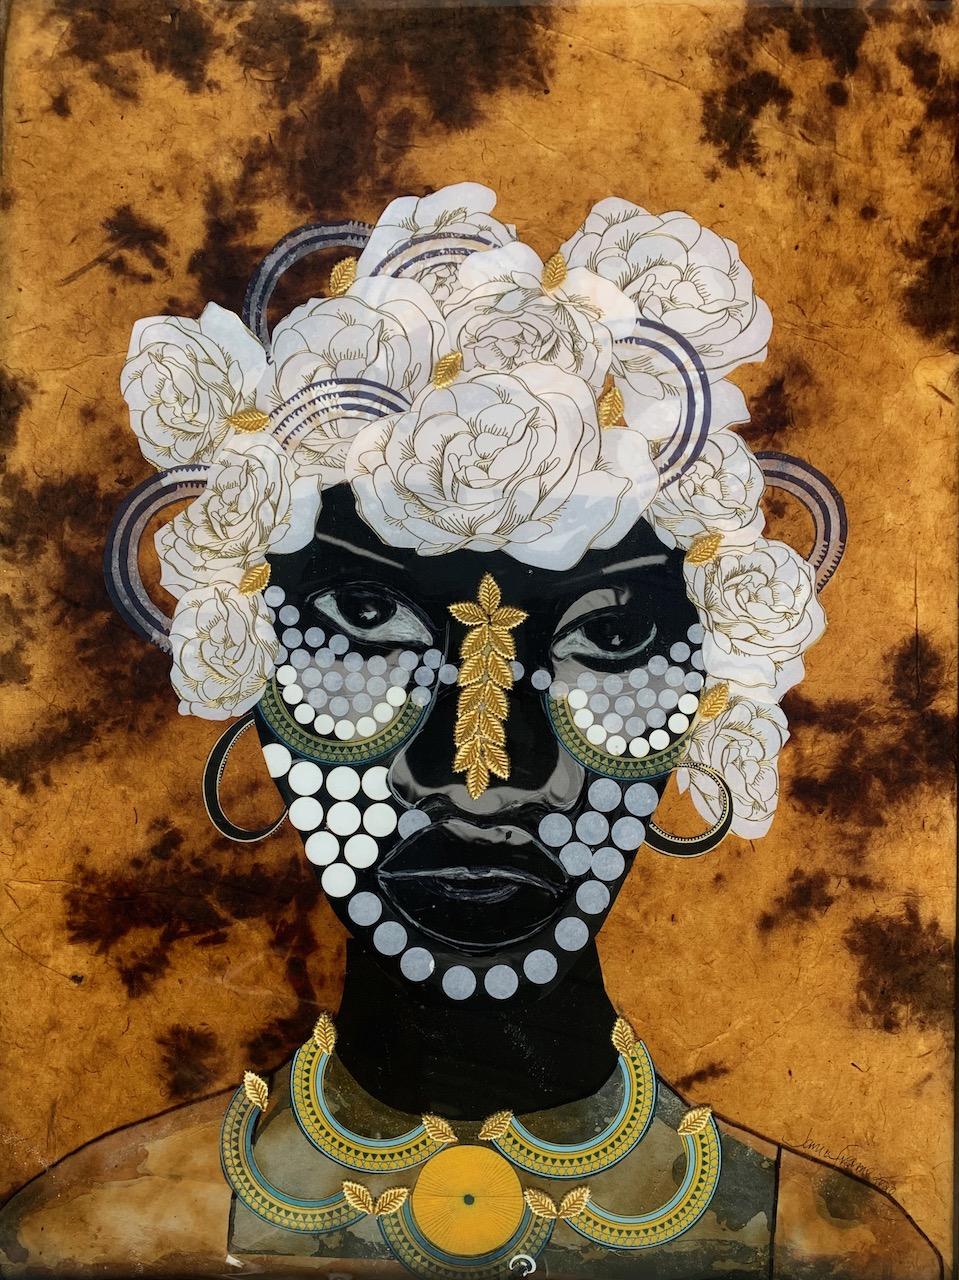 Janice Frame Portrait Painting - "Gentle Woman" Mixed media portrait of woman with gold and white flora in hair 